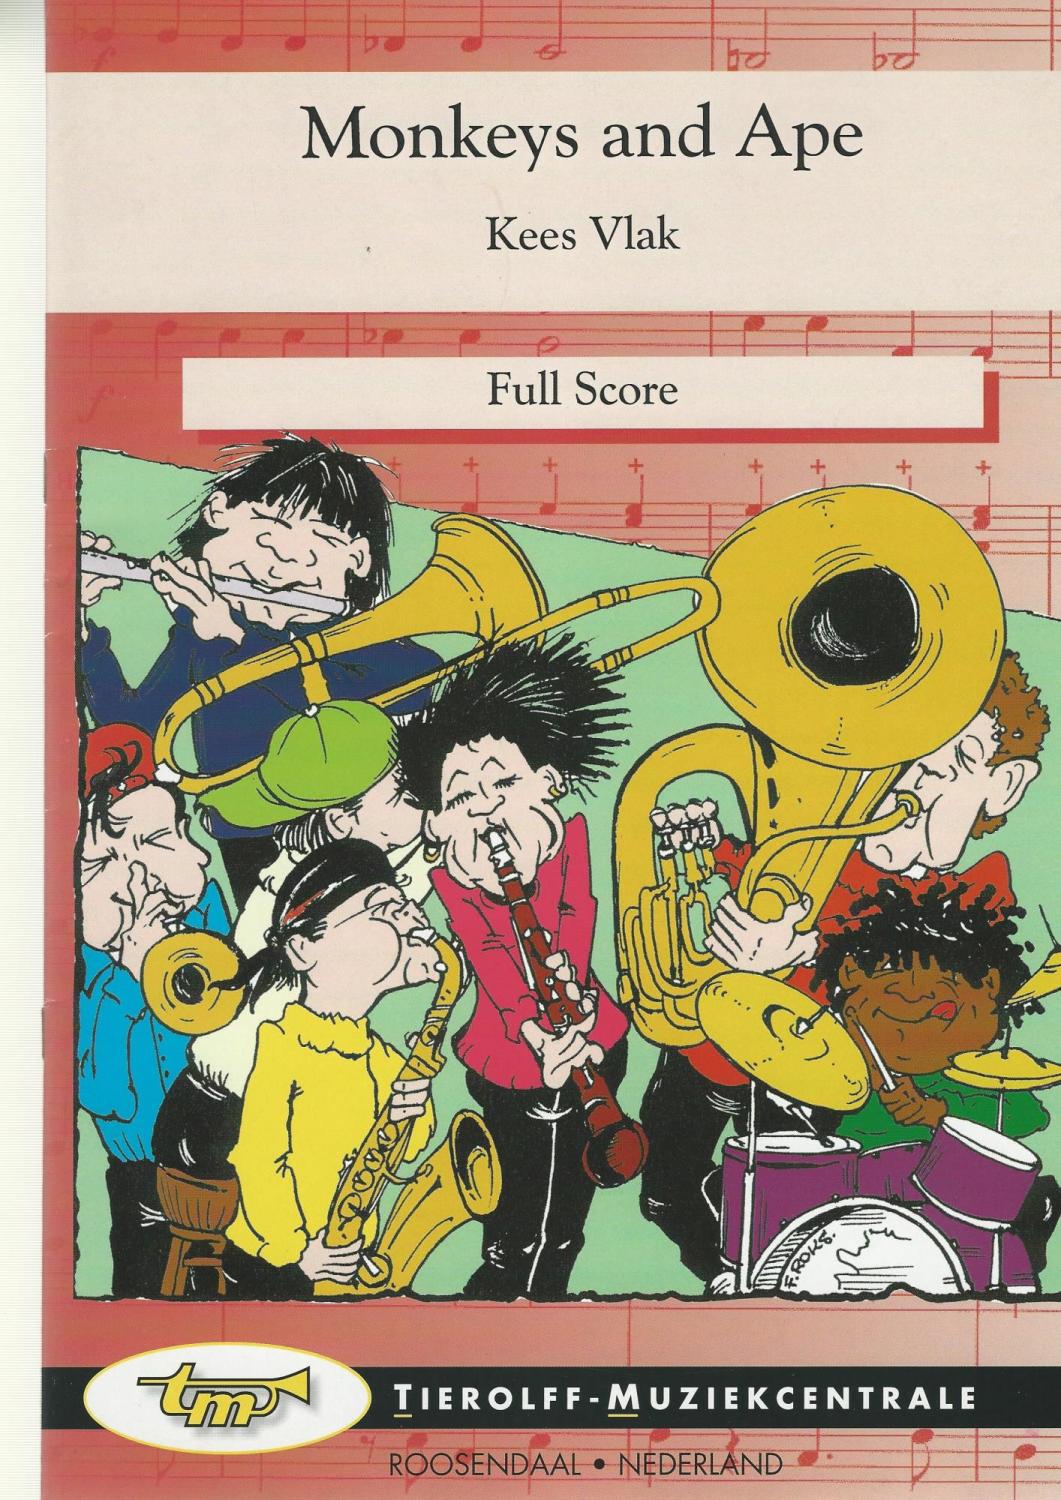 Monkeys and Apes for Brass Band (4-part Level 2) - Kees Vlak